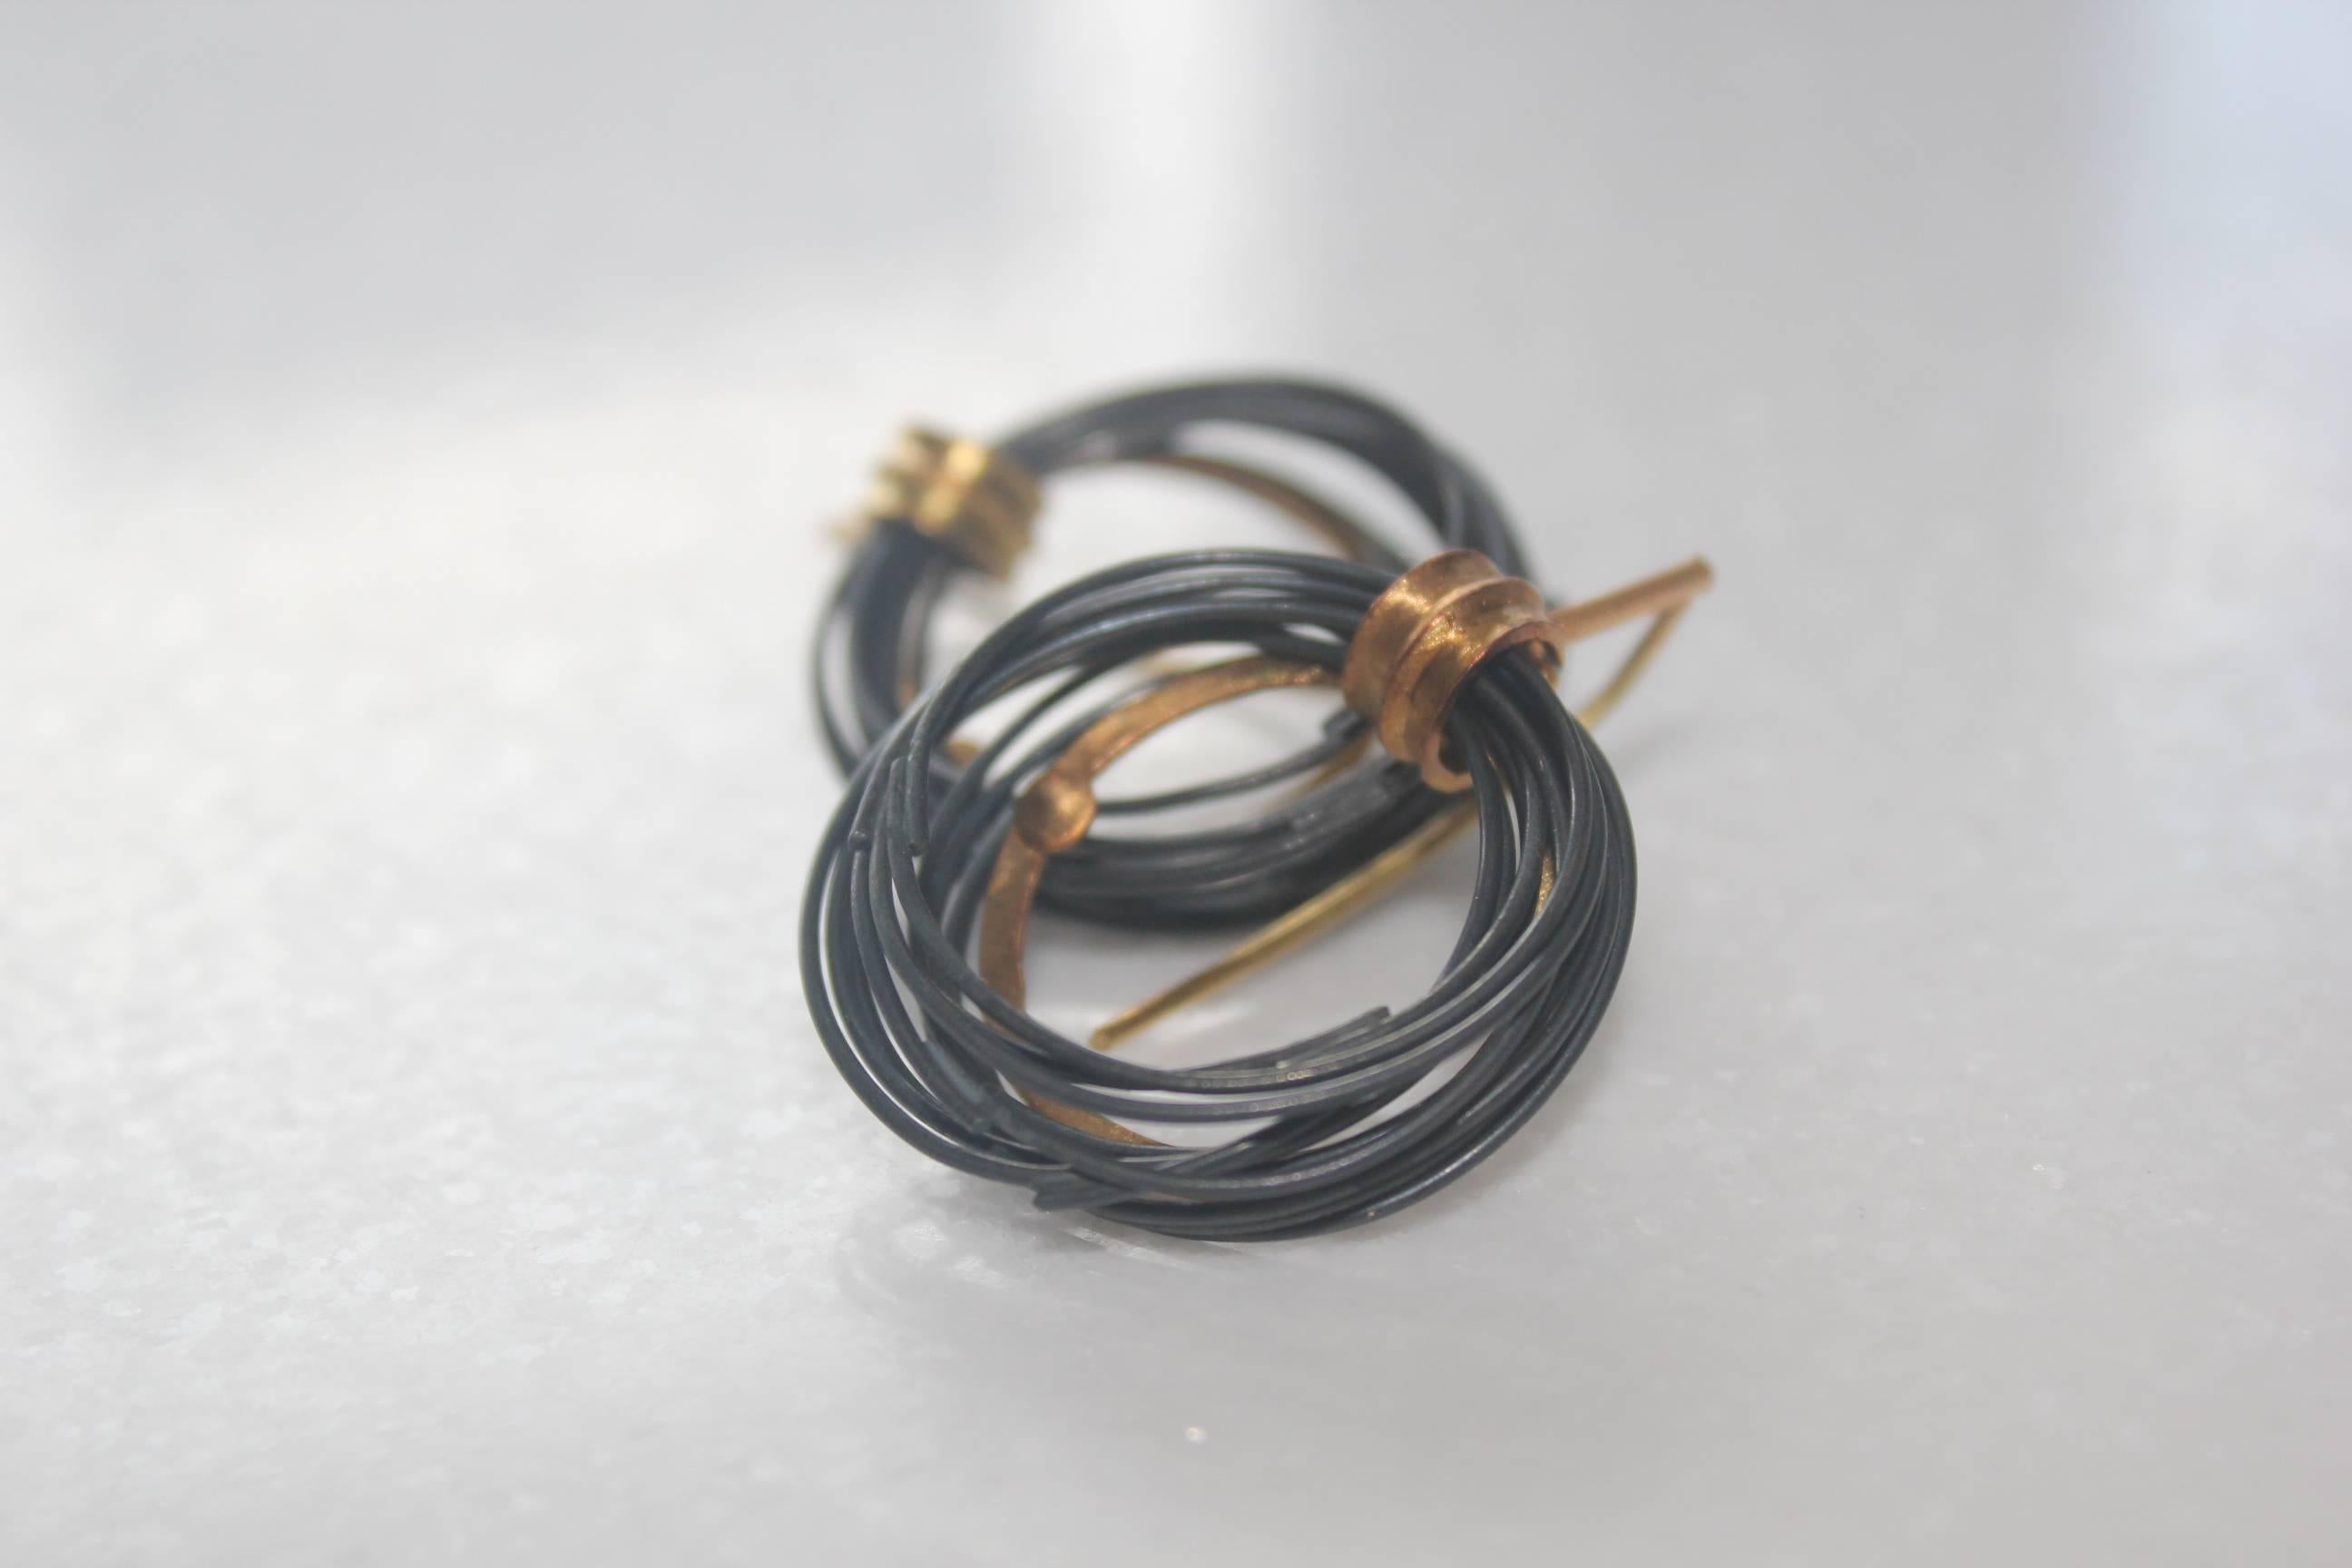 Contemporary 22K Gold and Oxidized Sterling Silver Handmade Dangle Hoop Earrings, AB Jewelry